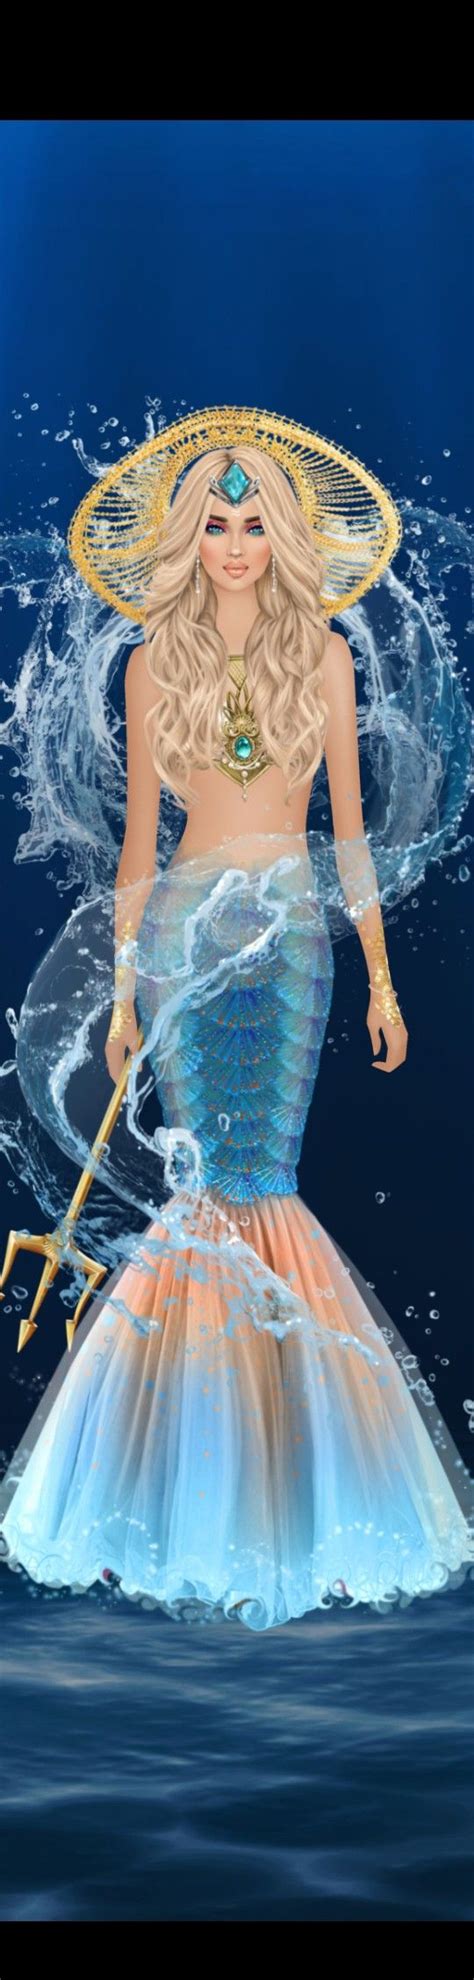 The Stinging Siren Covet Fashion Games Siren Disney Characters Fictional Characters